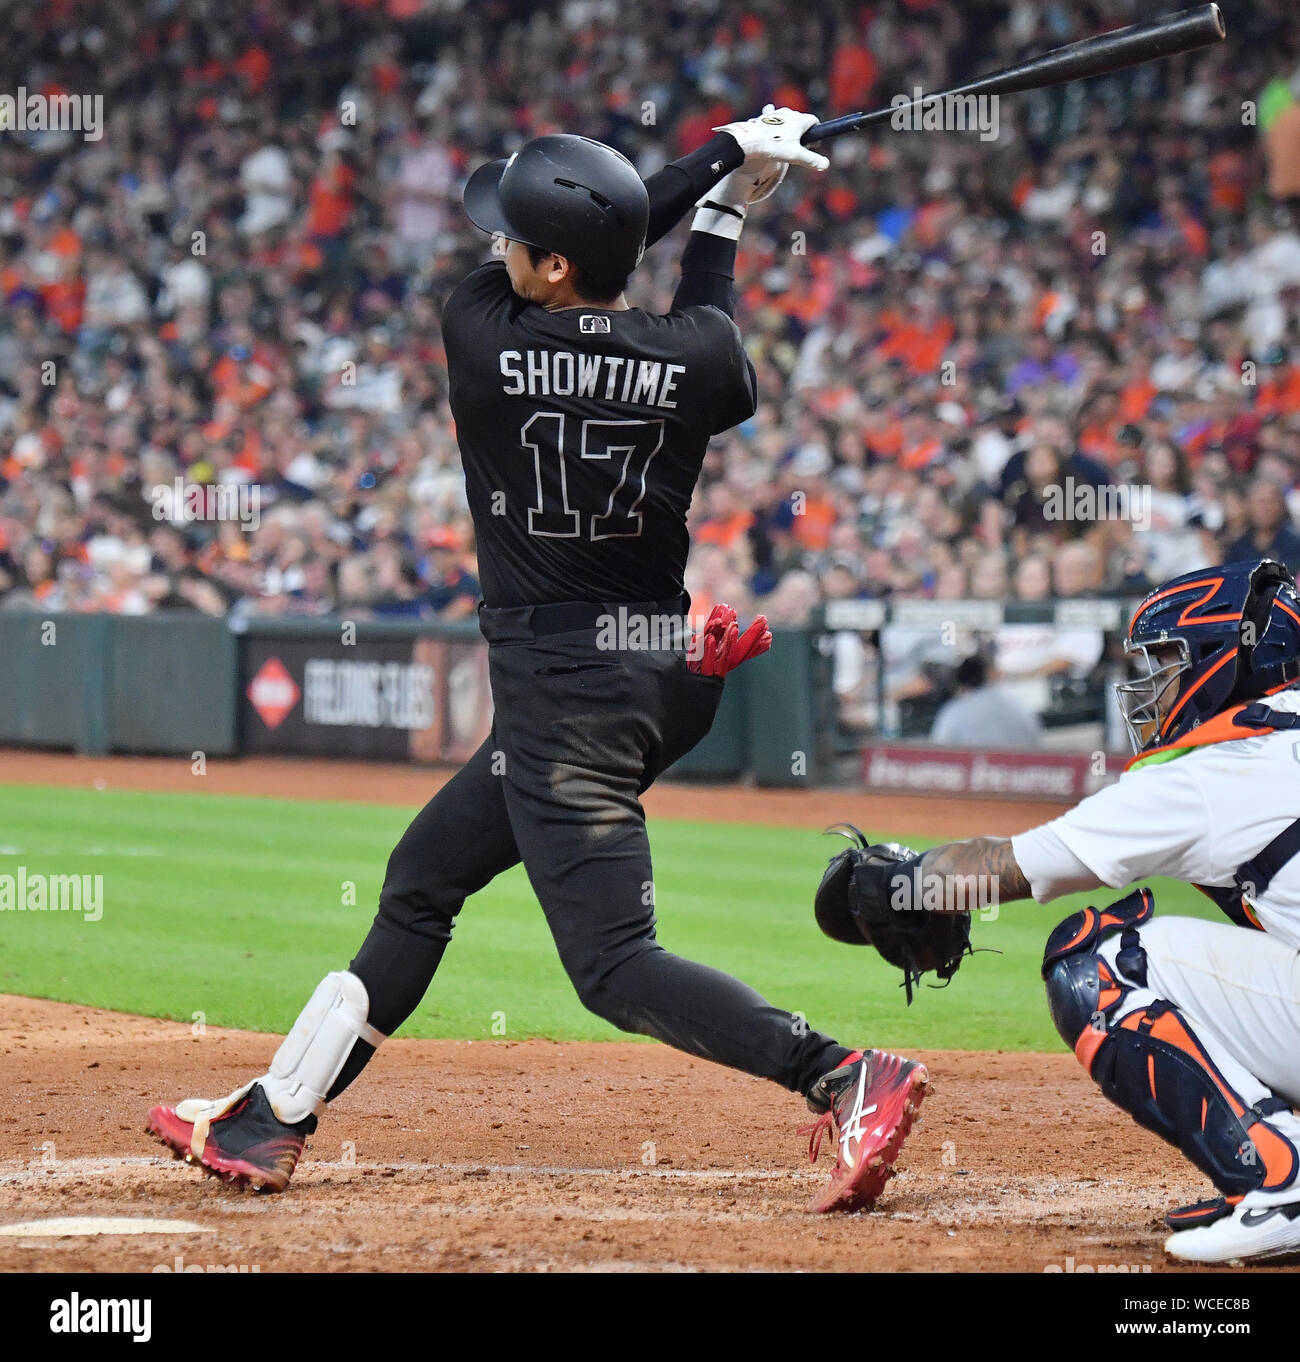 Shohei Ohtani of the Los Angeles Angels bats against the Houston Astros  during the Major League Baseball game Players Weekend at Minute Maid Park  on August 25, 2019 in Houston, United States.